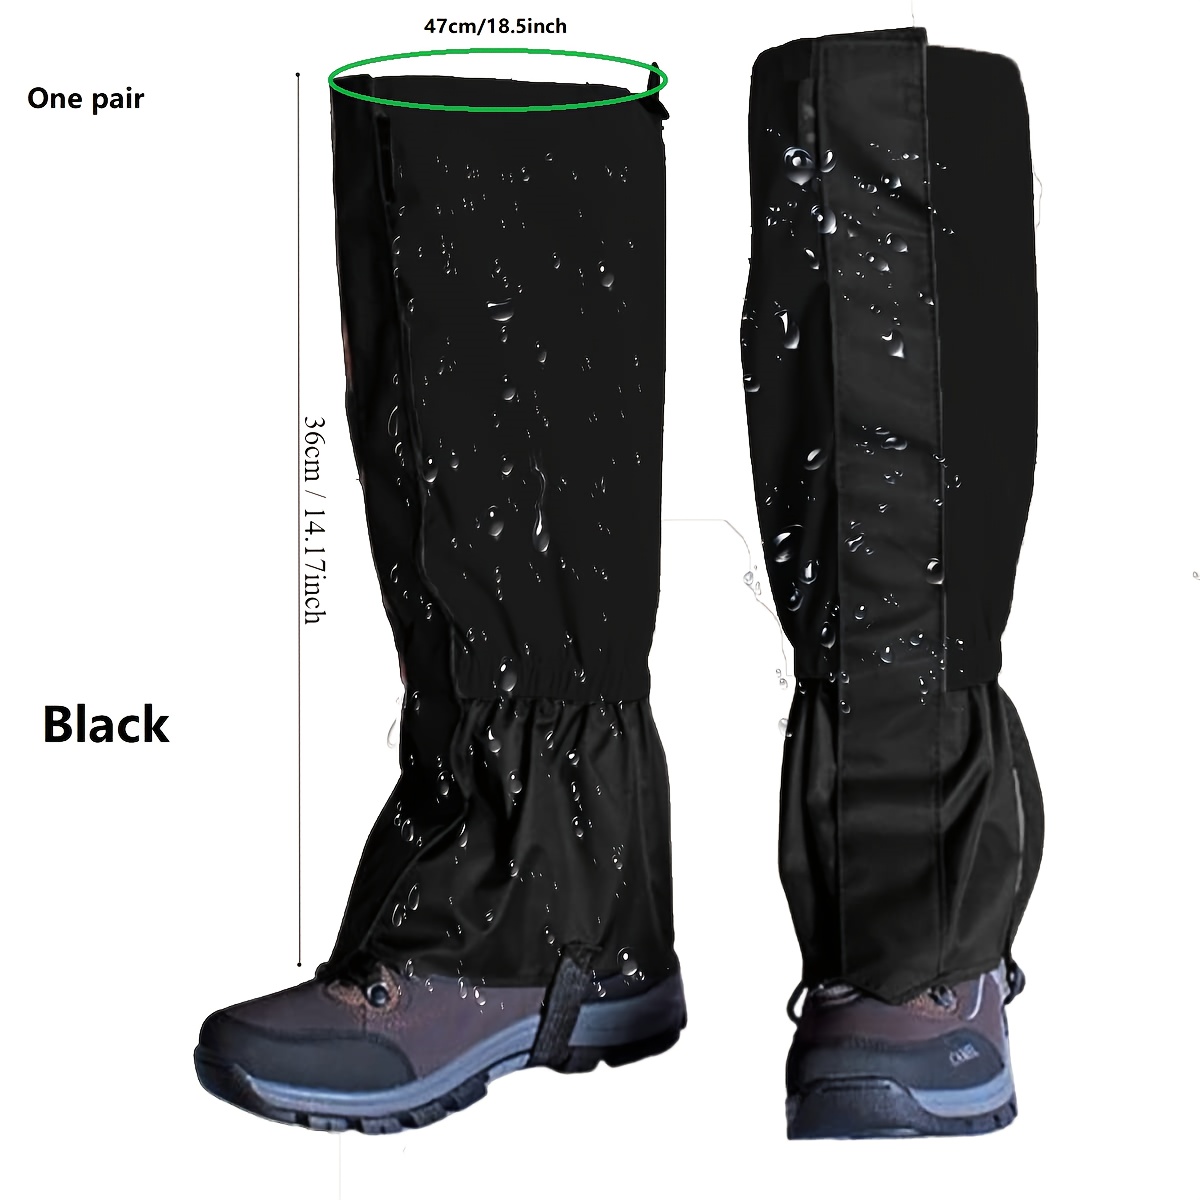  MAGGIFT Leg Gaiters,Gaiters for Hiking Waterproof and  Adjustable Snow Boot Gaiters for Walking, Hunting, Mountain Climbing, and  Snowshoeing (Black) : Sports & Outdoors